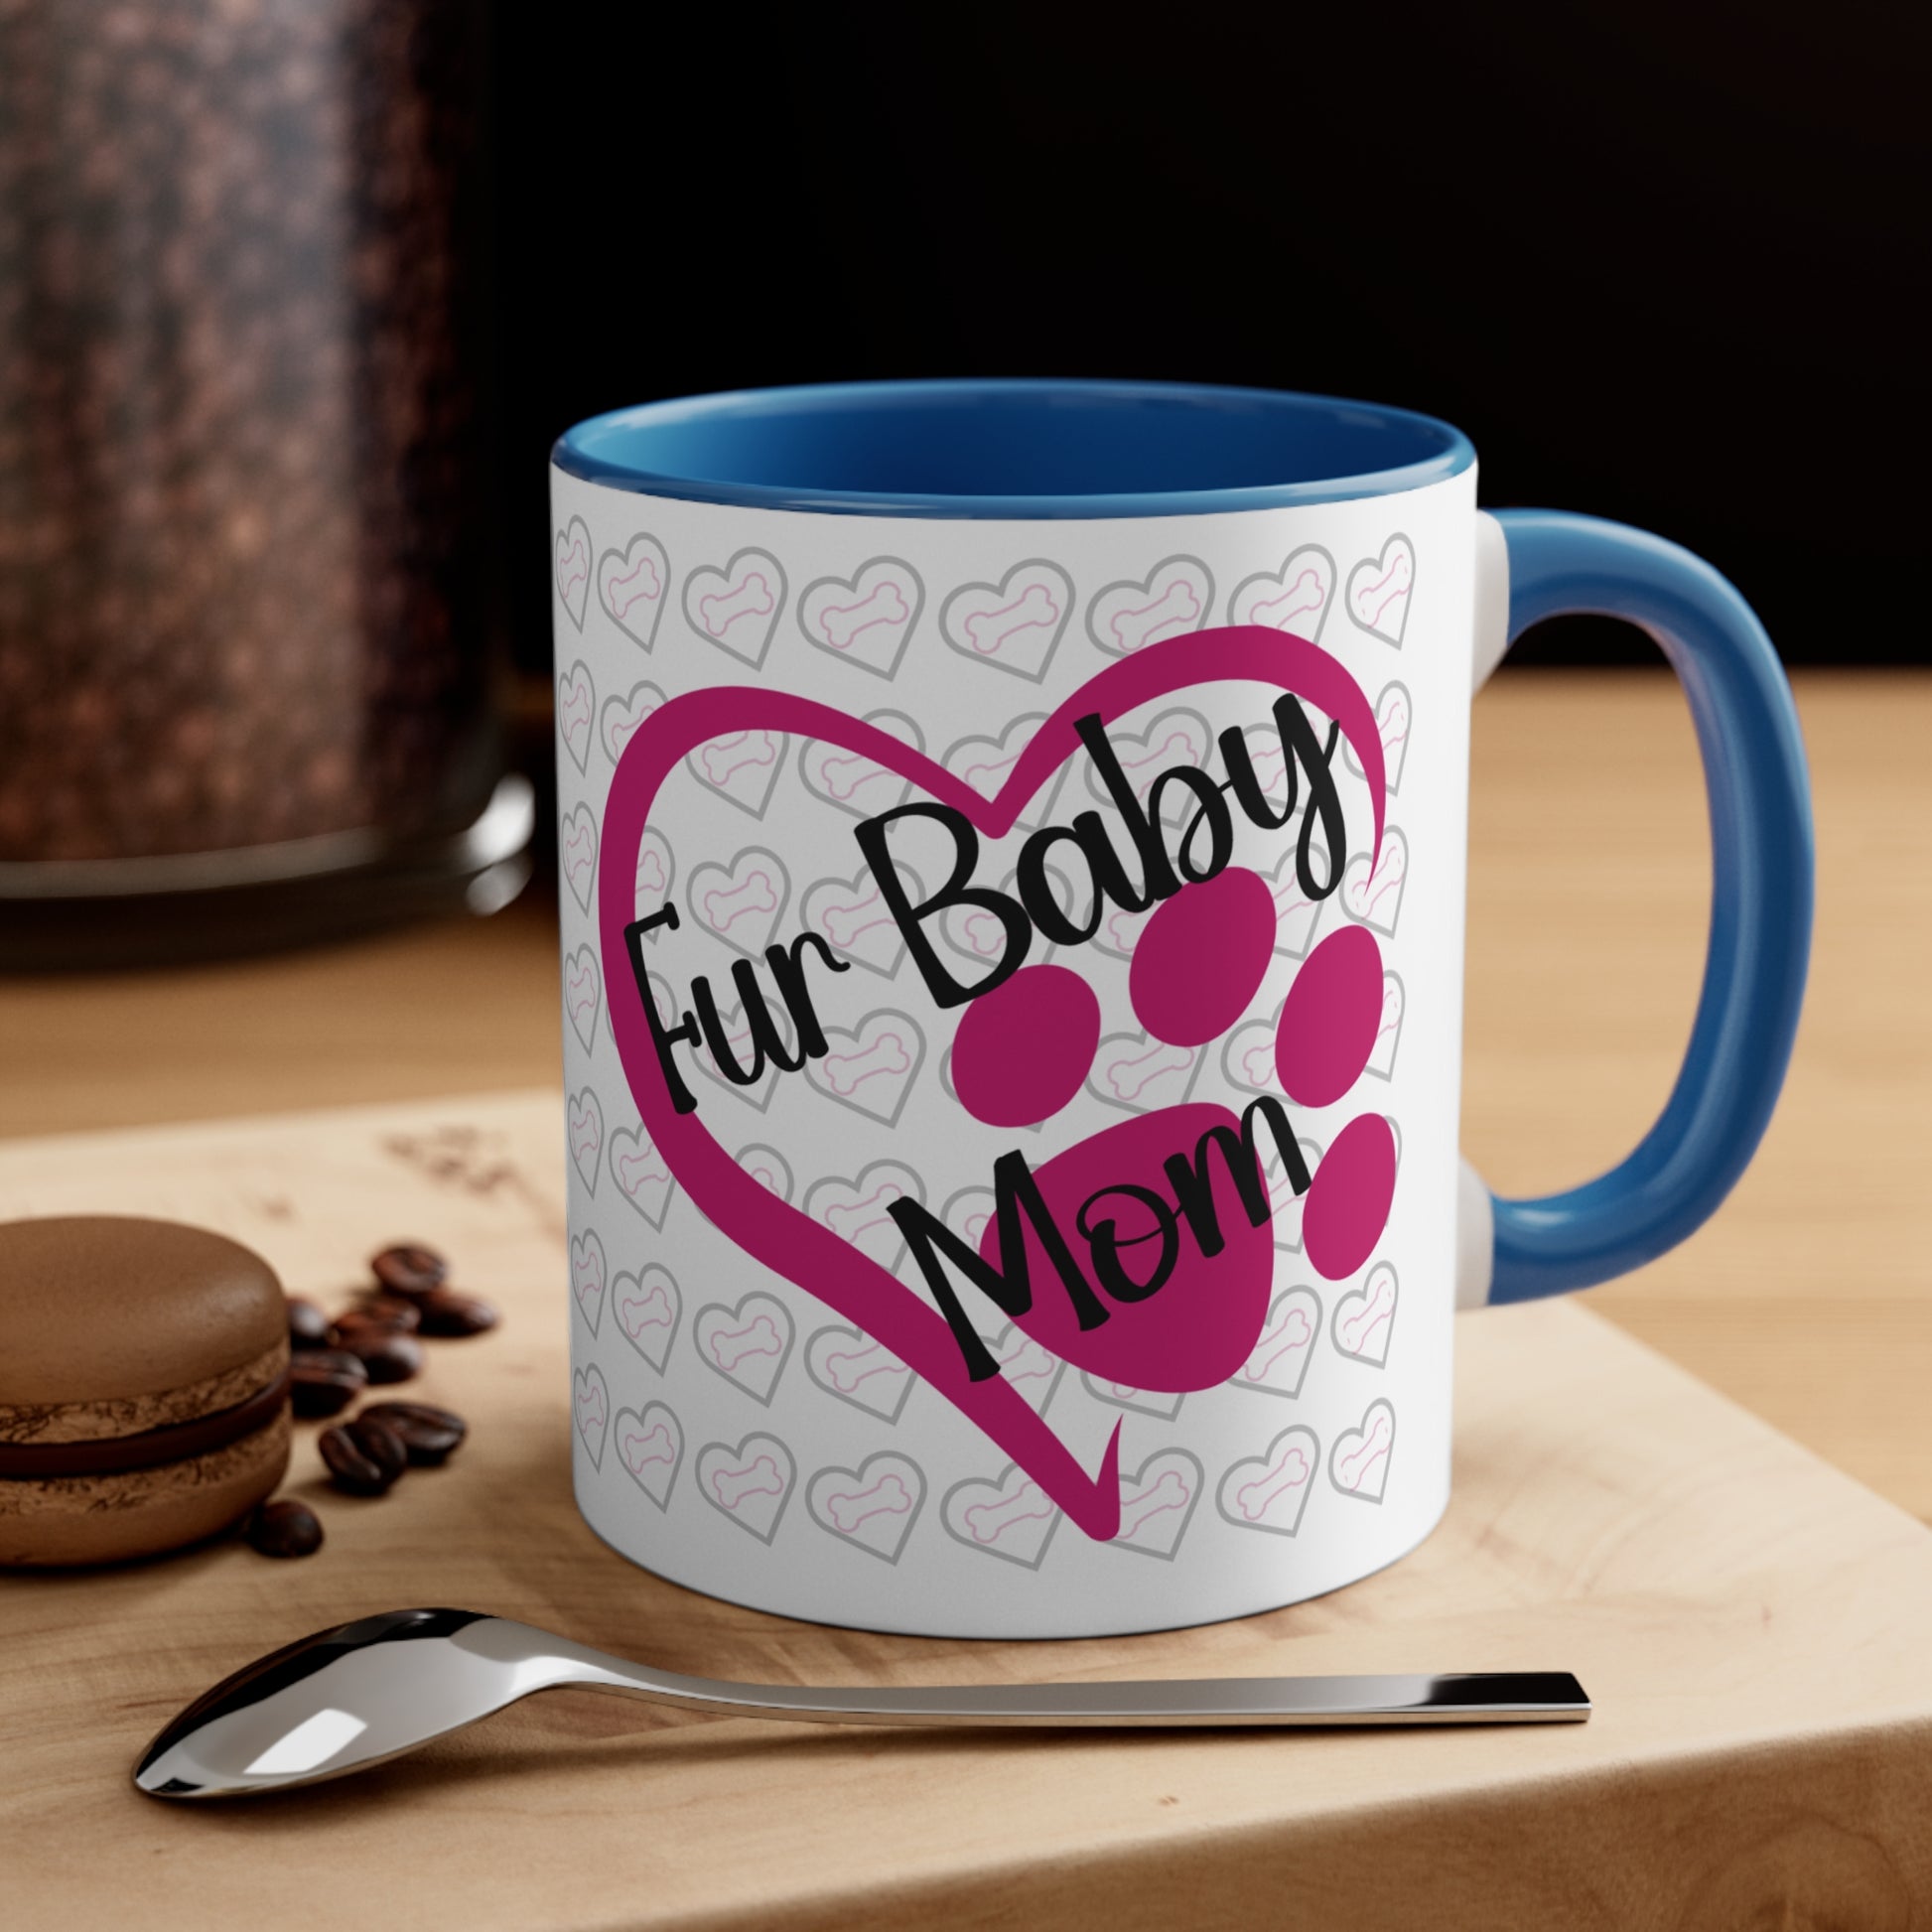 Fur baby mom coffee mug with pink heart and paw print 11 oz, front view in blue.